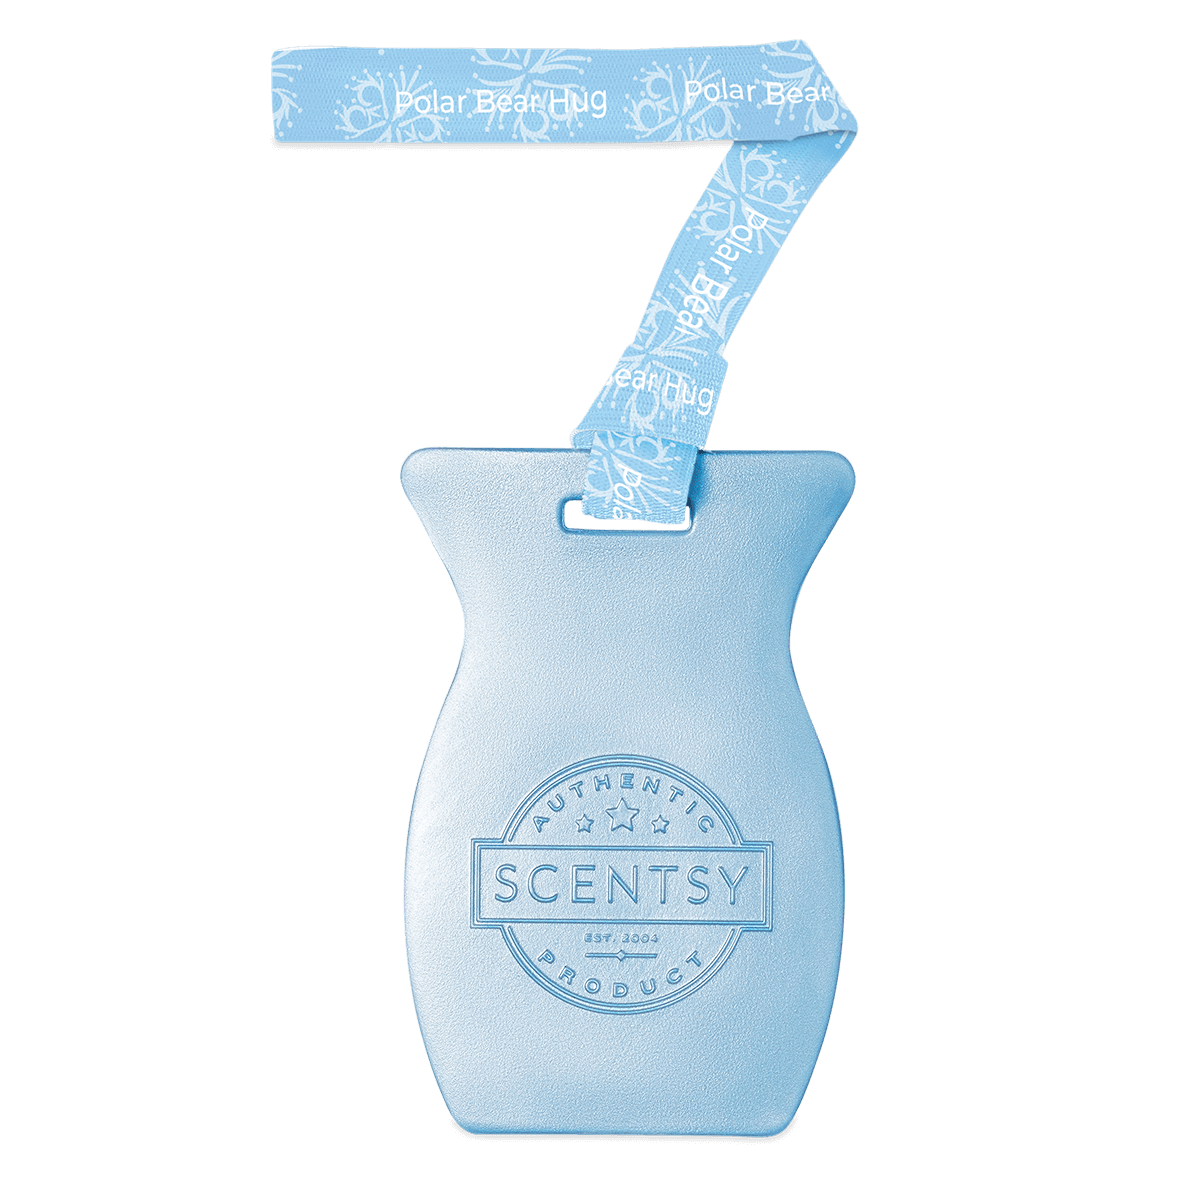 Blue Grotto Scentsy Bar, Best Fragrance